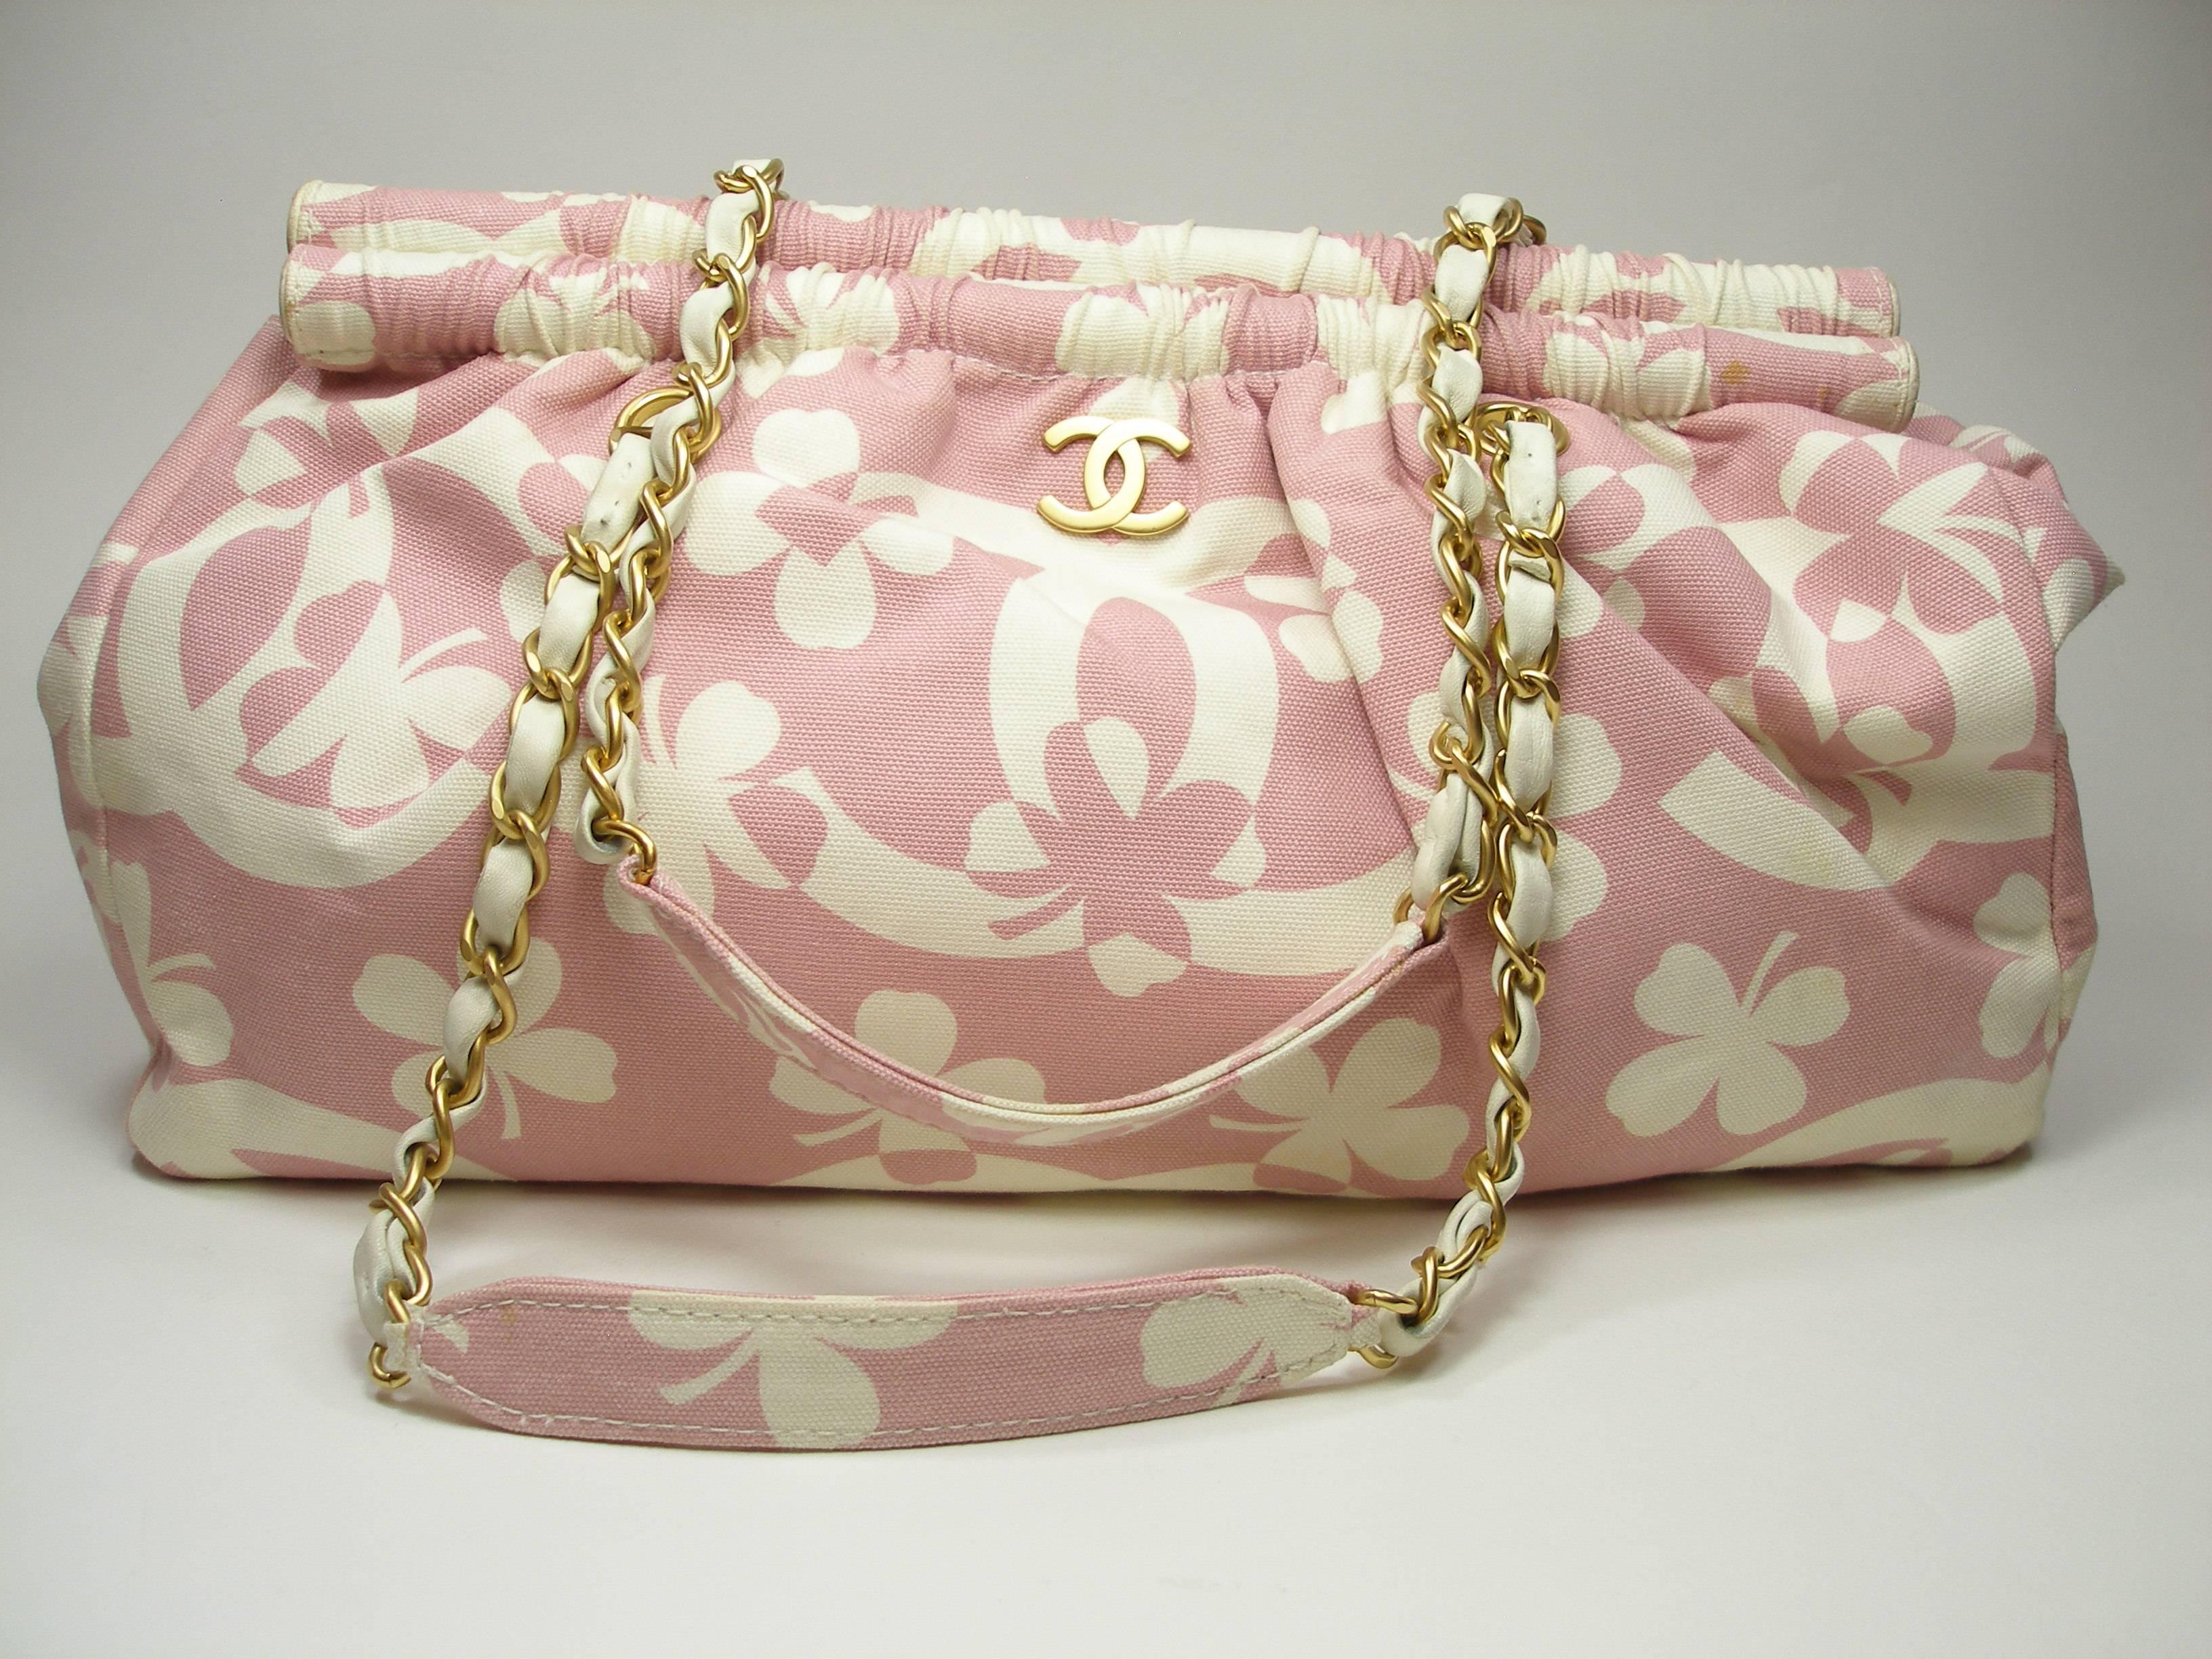 Collectible Summer 2004 Chanel 
Chanel Vintage CHANEL Clover chain shoulder bag Pink / Ecru XL Size
Canvas and leather
 Magnetic clasp
 Removable pouch
Gold hardware
Dimensions  approximative : 40 x 20 x 10 cm or 15.7 x 7.87 x 3.93 